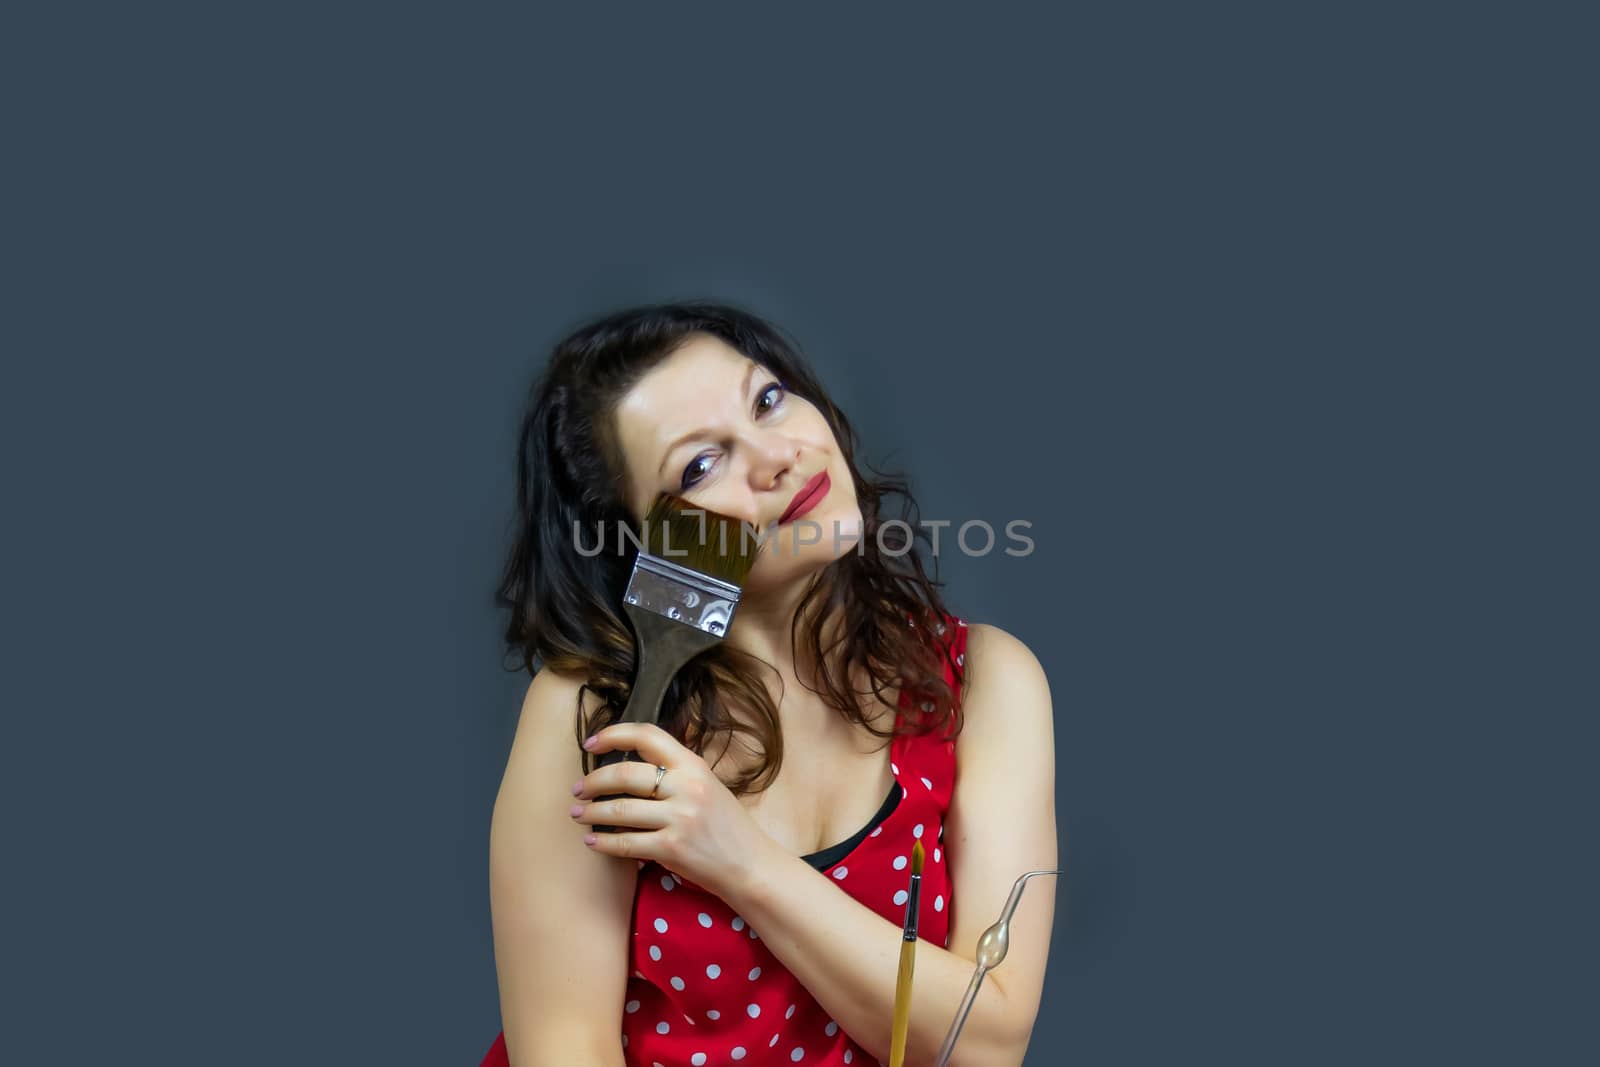 Portrait of a beautiful, fashionable middle-aged woman with long dark hair in a red dress, holding a paintbrush and posing on a dark gray background. by bonilook